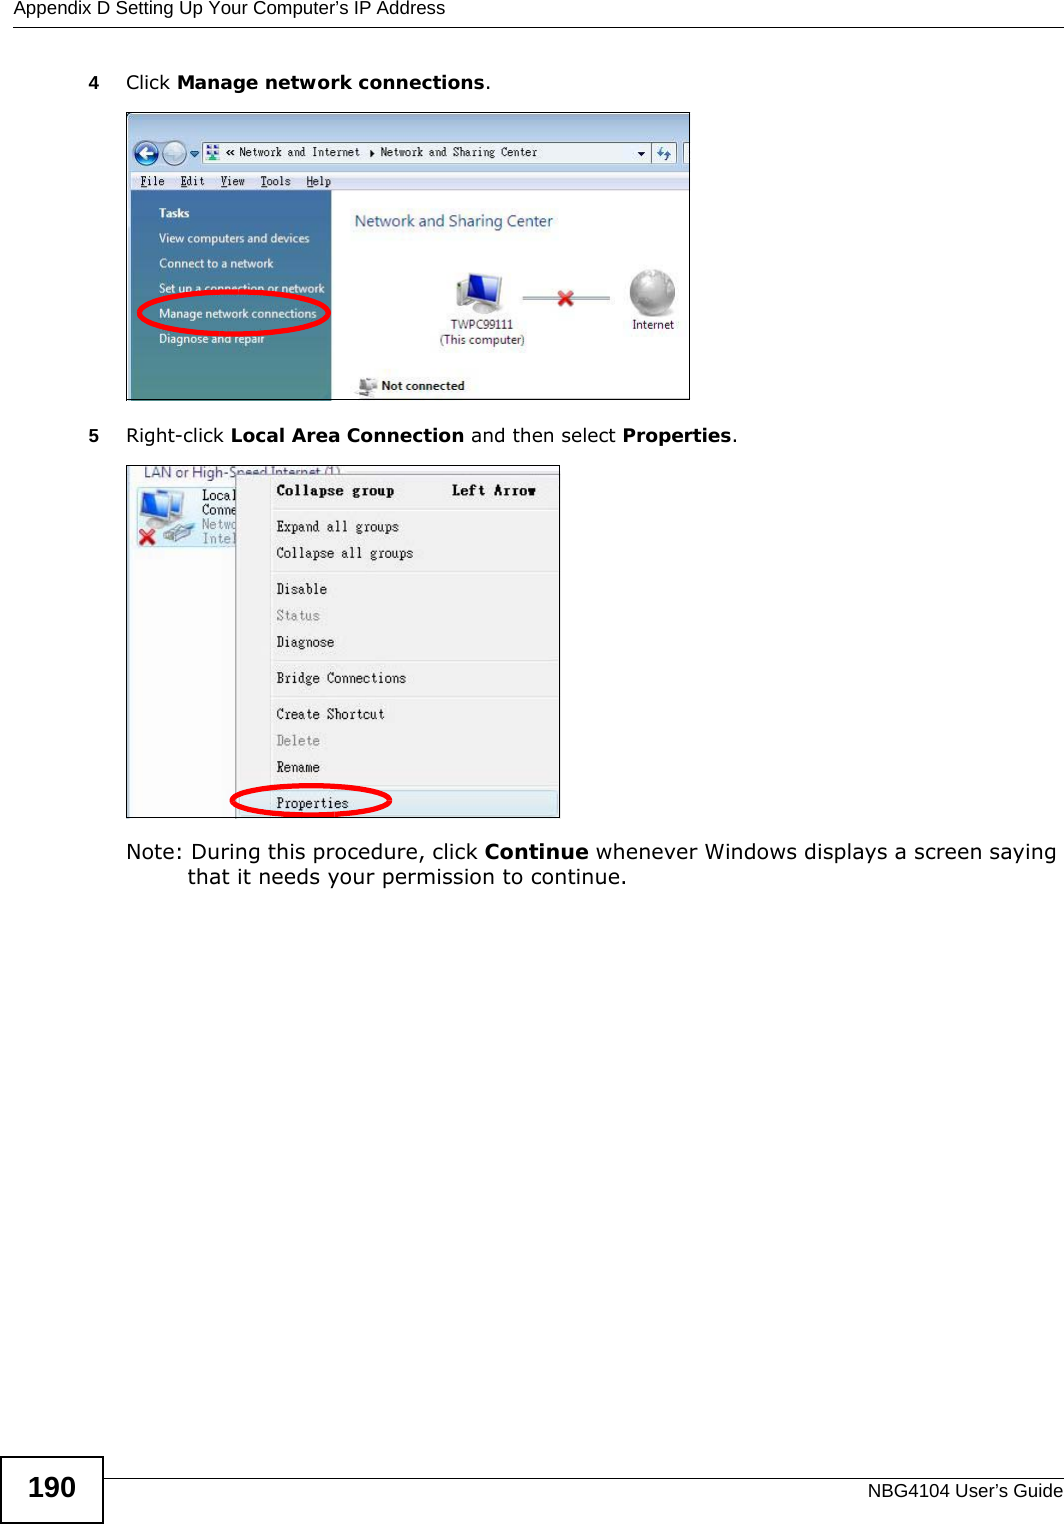 Appendix D Setting Up Your Computer’s IP AddressNBG4104 User’s Guide1904Click Manage network connections.5Right-click Local Area Connection and then select Properties.Note: During this procedure, click Continue whenever Windows displays a screen saying that it needs your permission to continue.